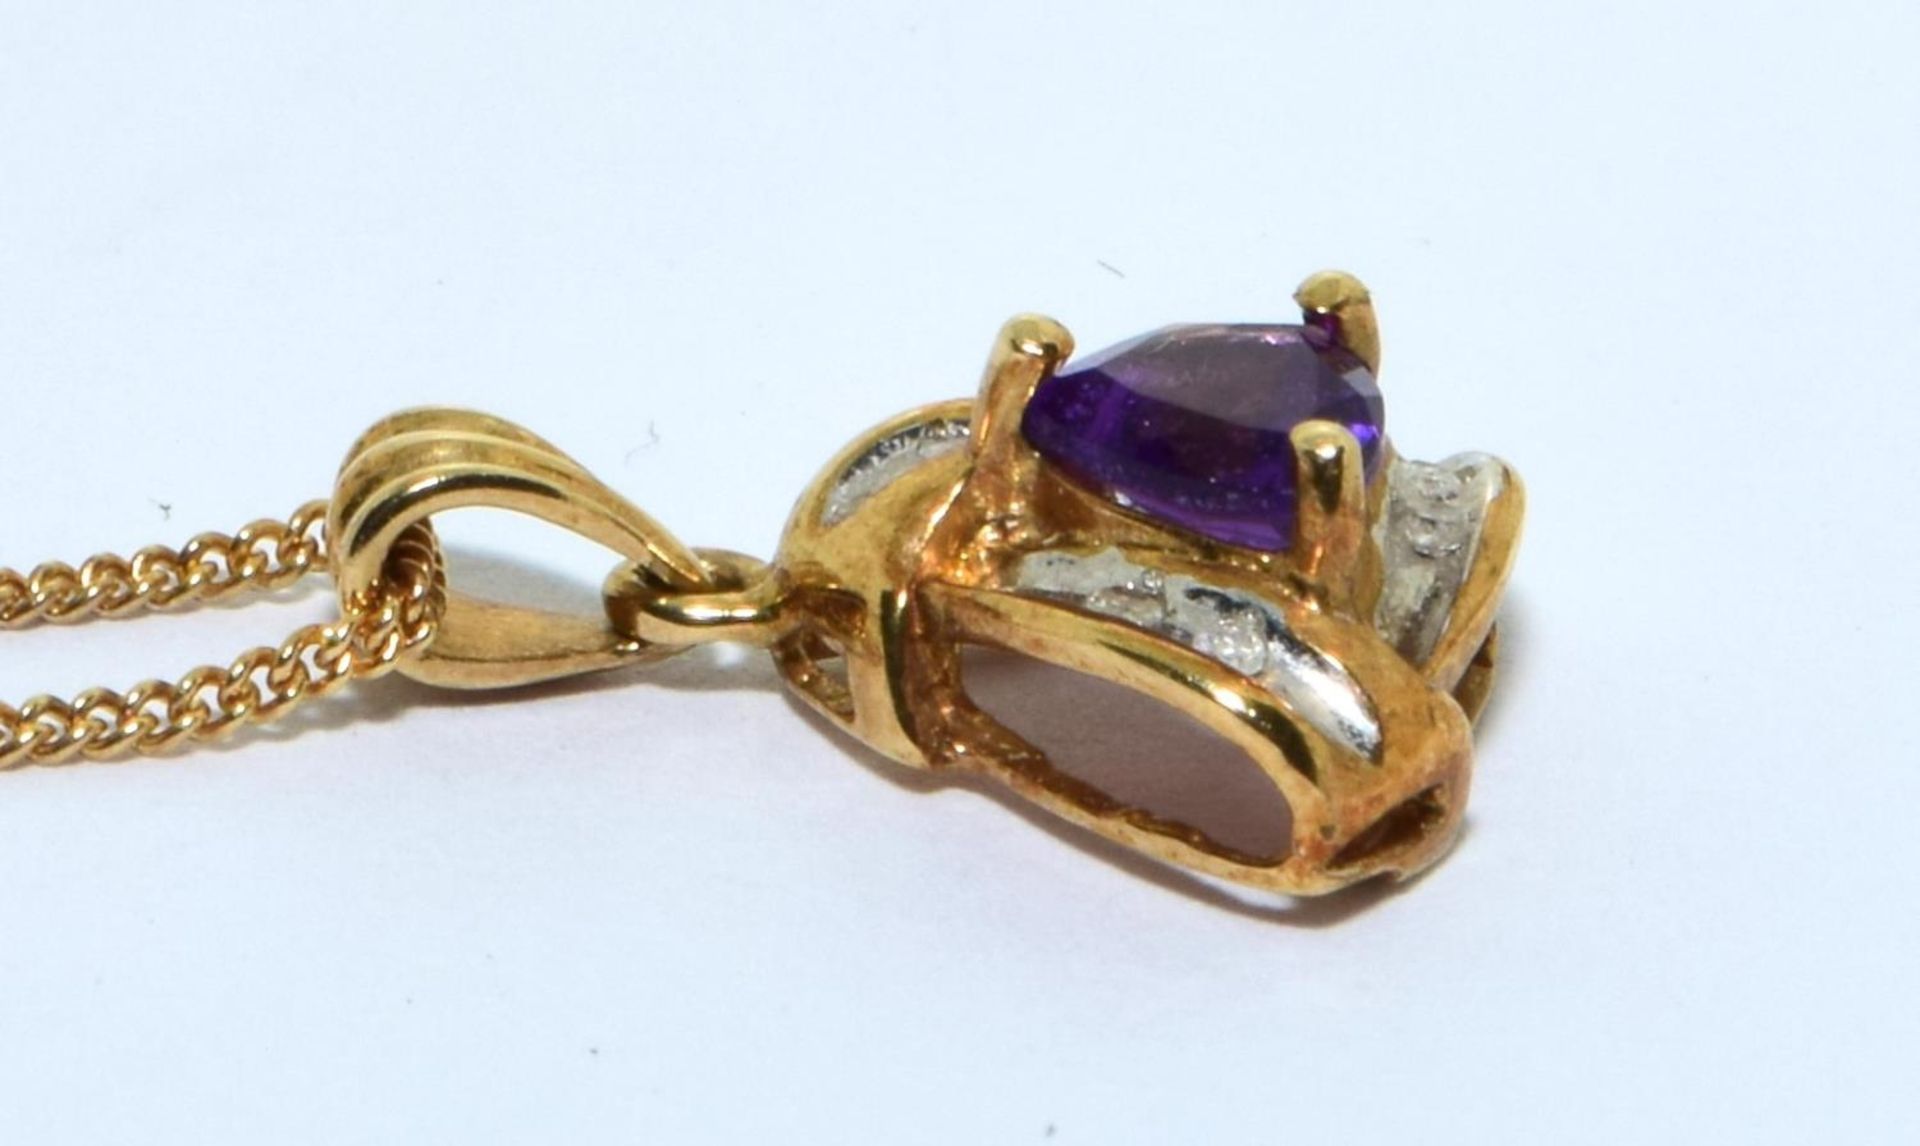 9ct gold Diamond and Amethyst pendant necklace with a chain of 46cm - Image 3 of 6